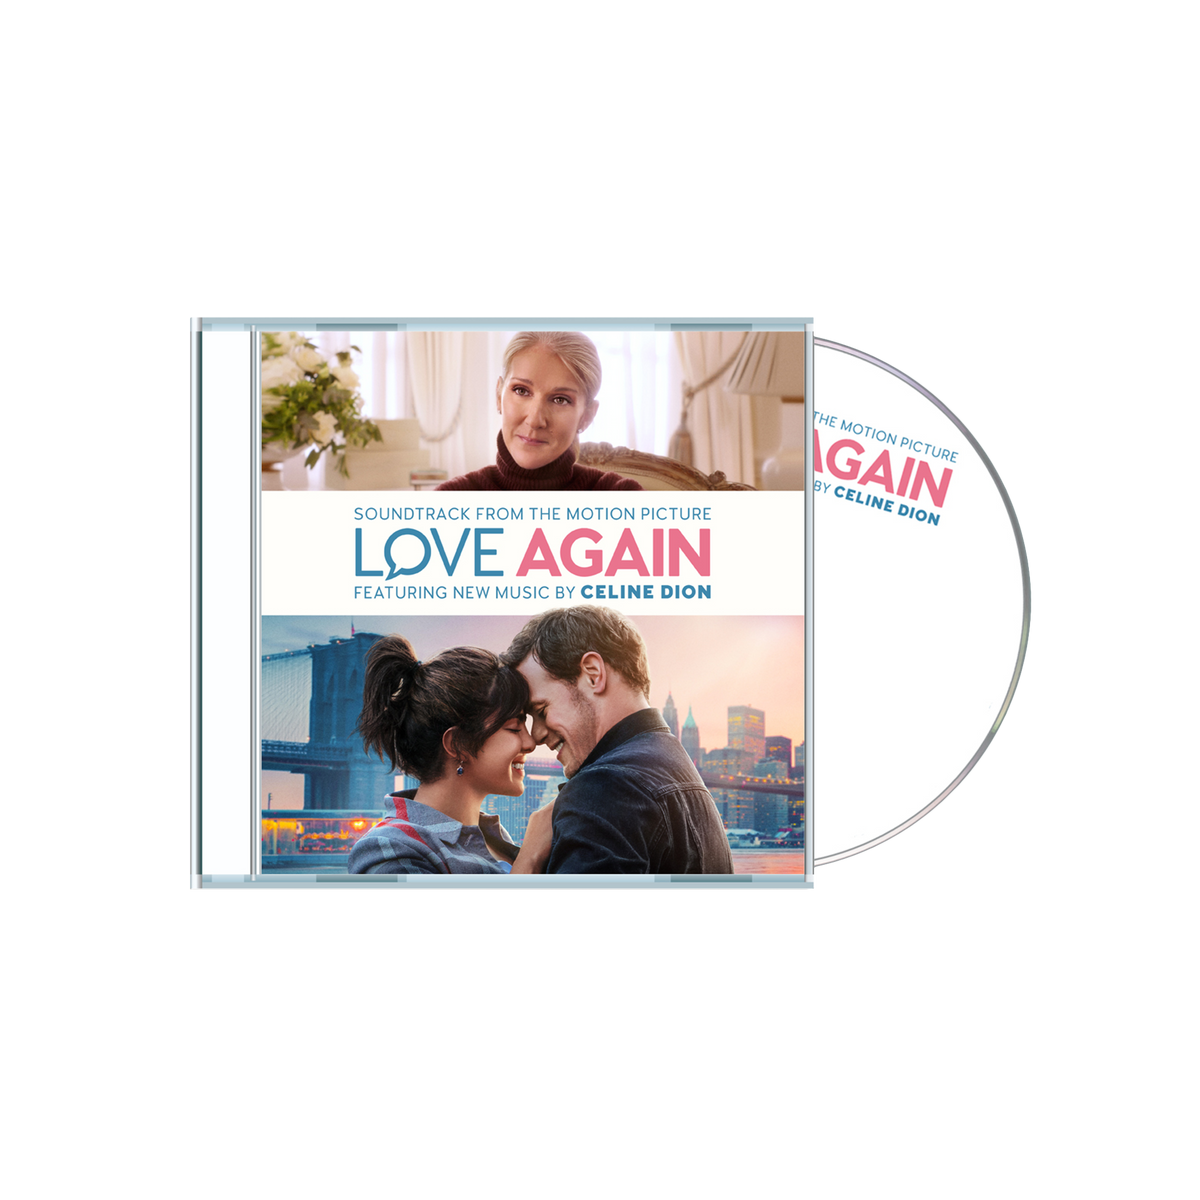 LOVE AGAIN (Soundtrack From The Motion Picture) CD